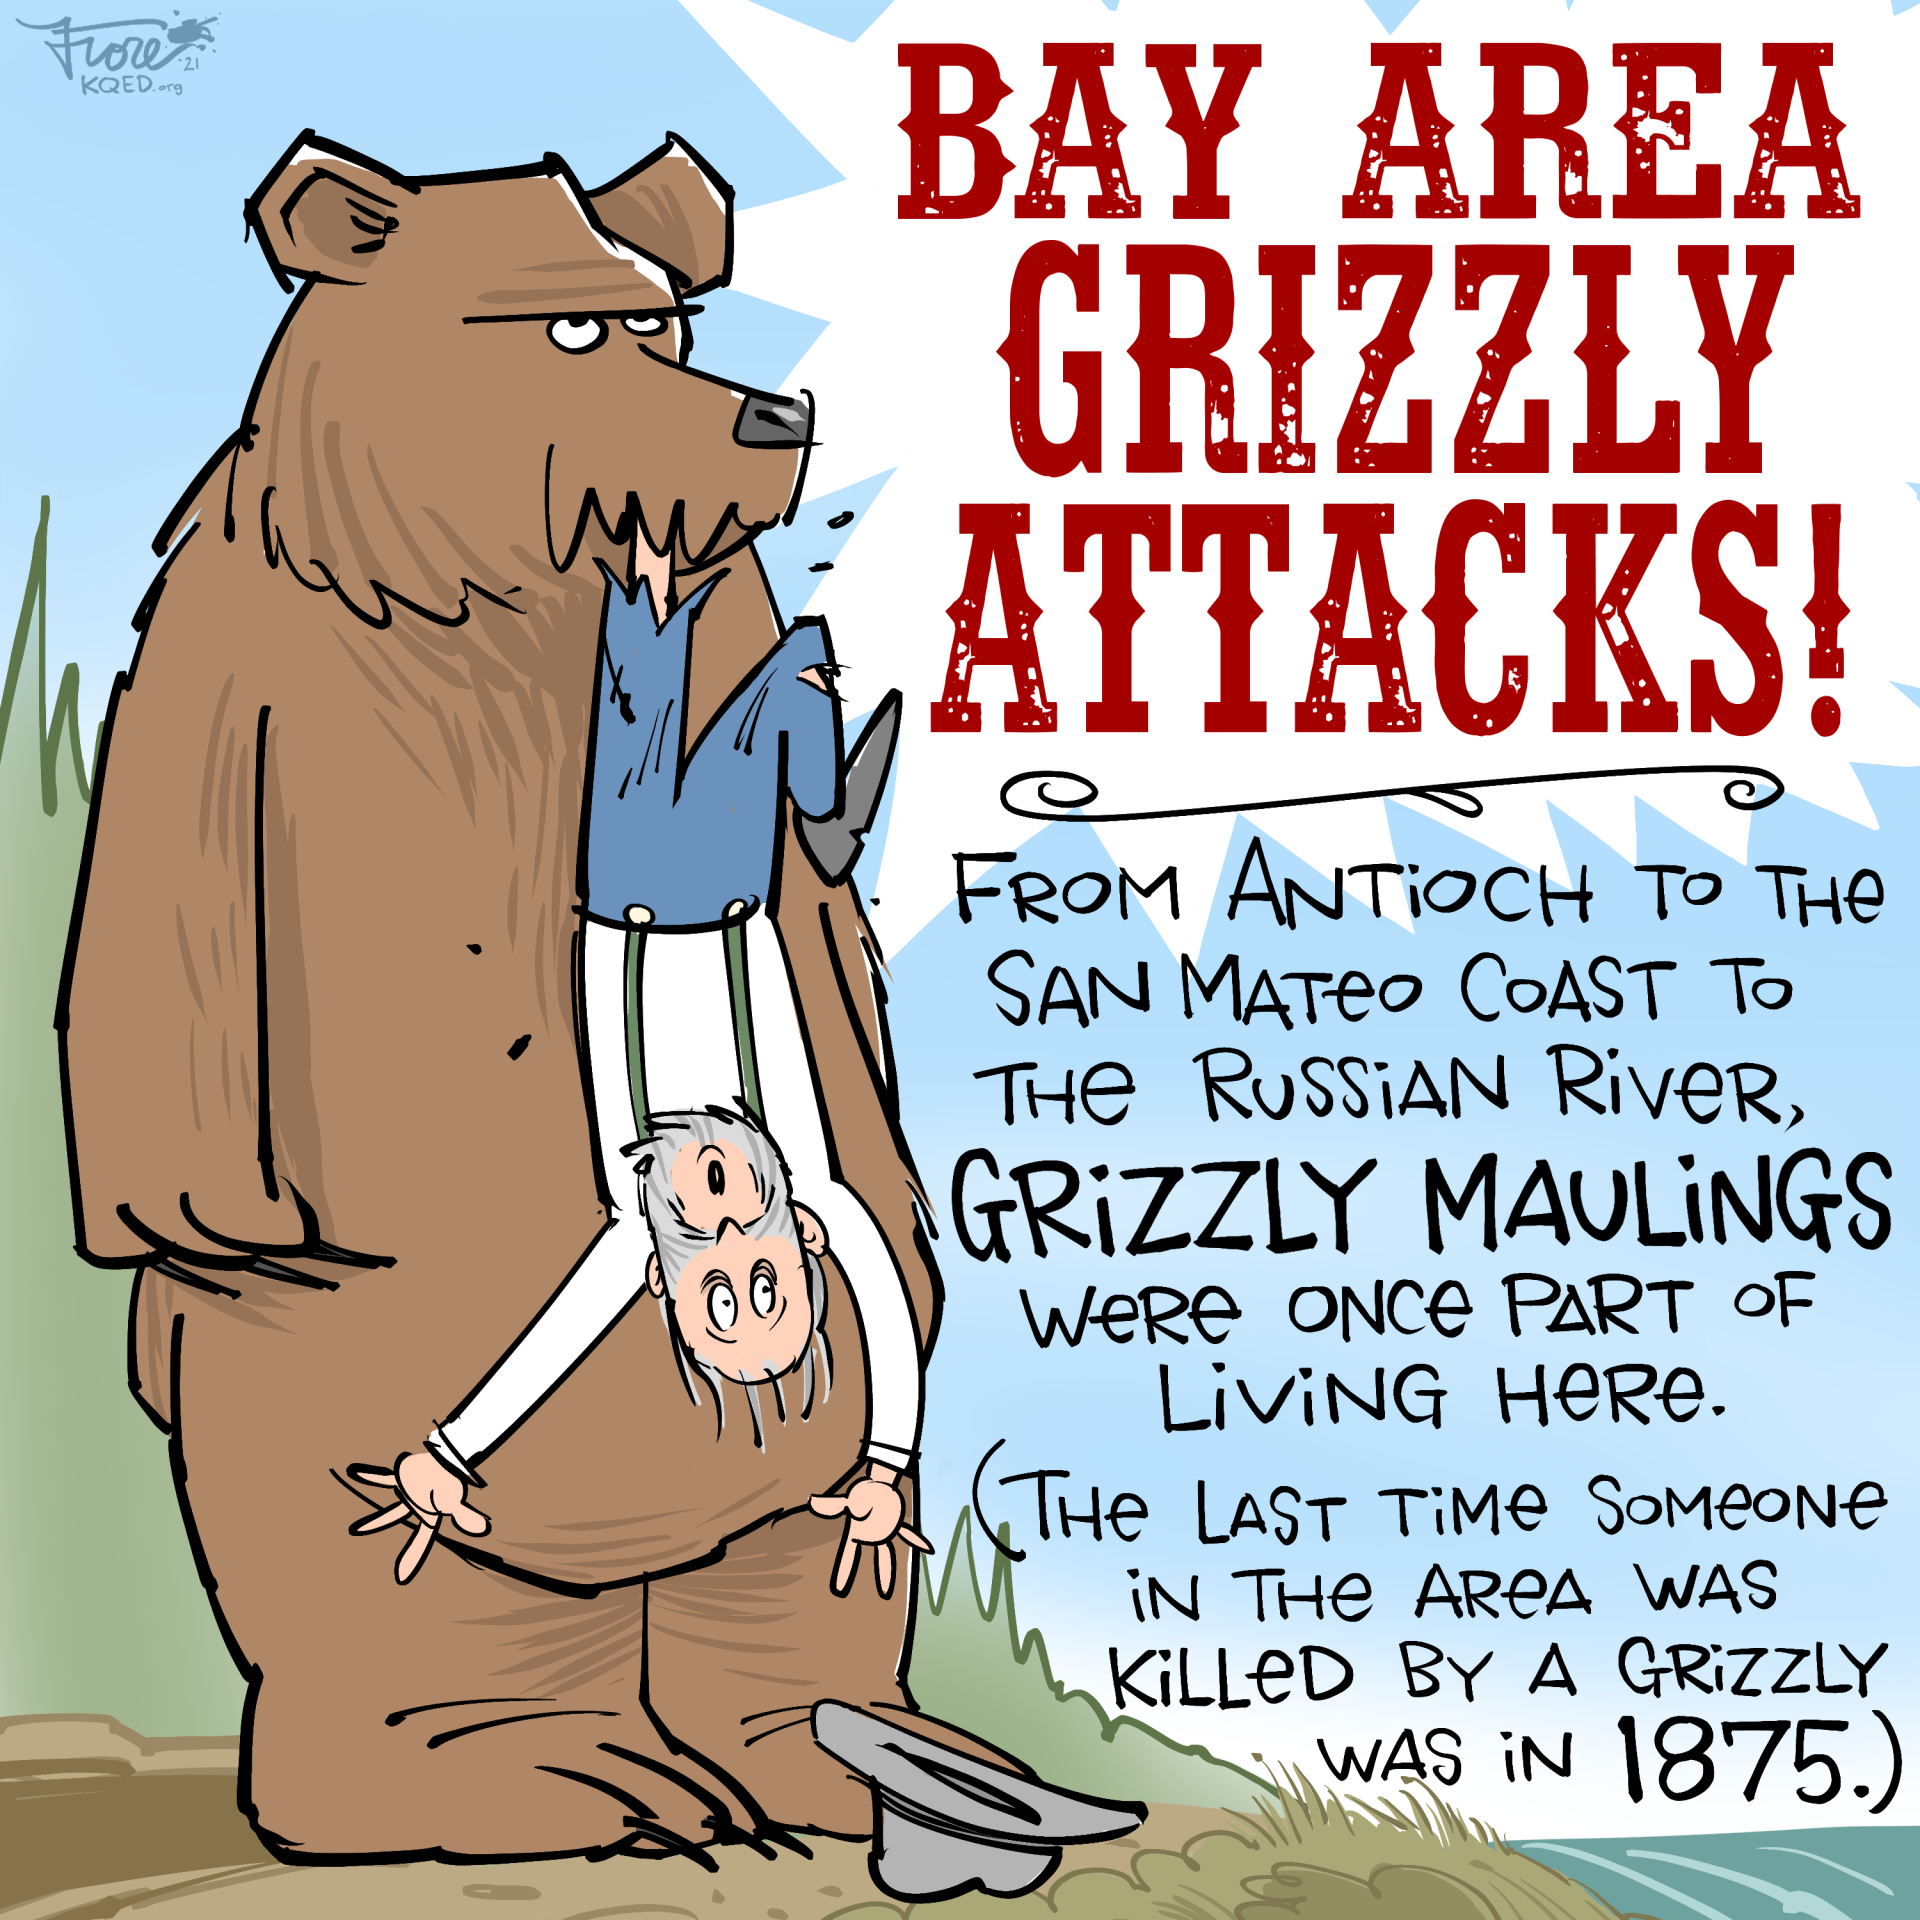 Cartoon: a huge grizzly bear holding a man by his leg. Text reads, "Bay Area grizzly bear attacks! From Antioch to the San Mateo Coast to the Russian River, grizzly attacks were once part of living here."